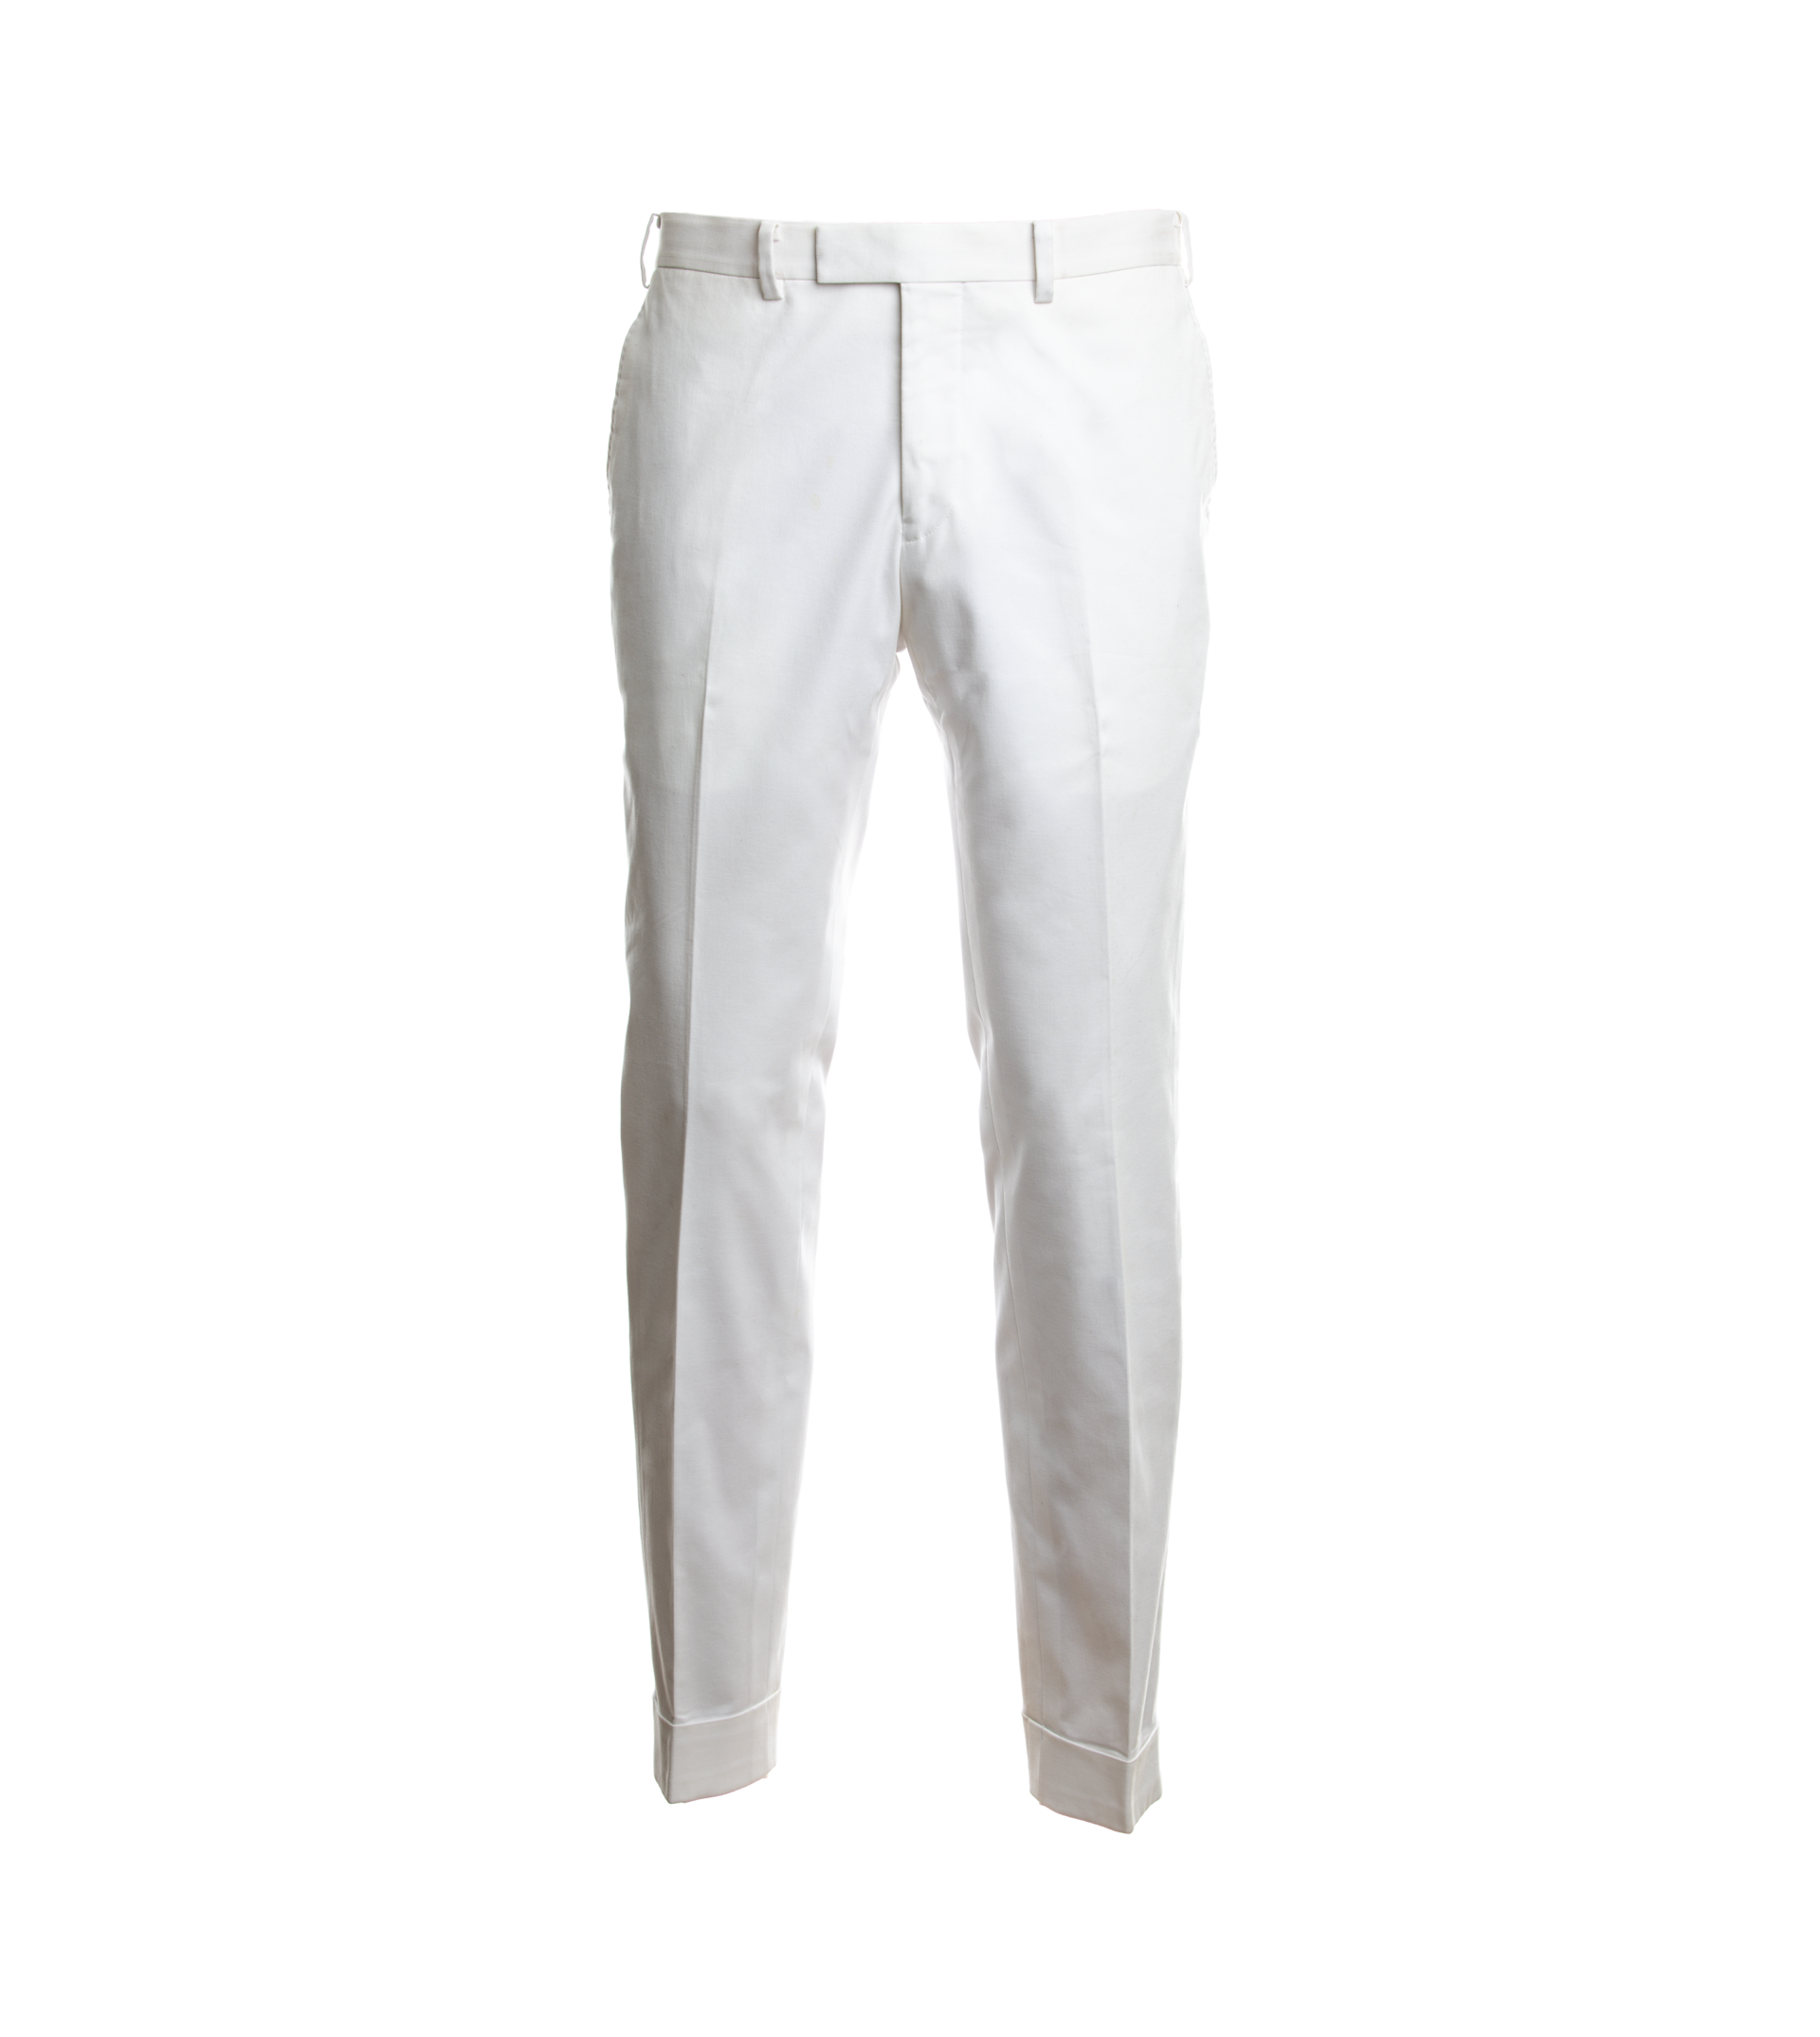 Relaxed Fit Cotton trousers - Black - Men | H&M IN-cheohanoi.vn